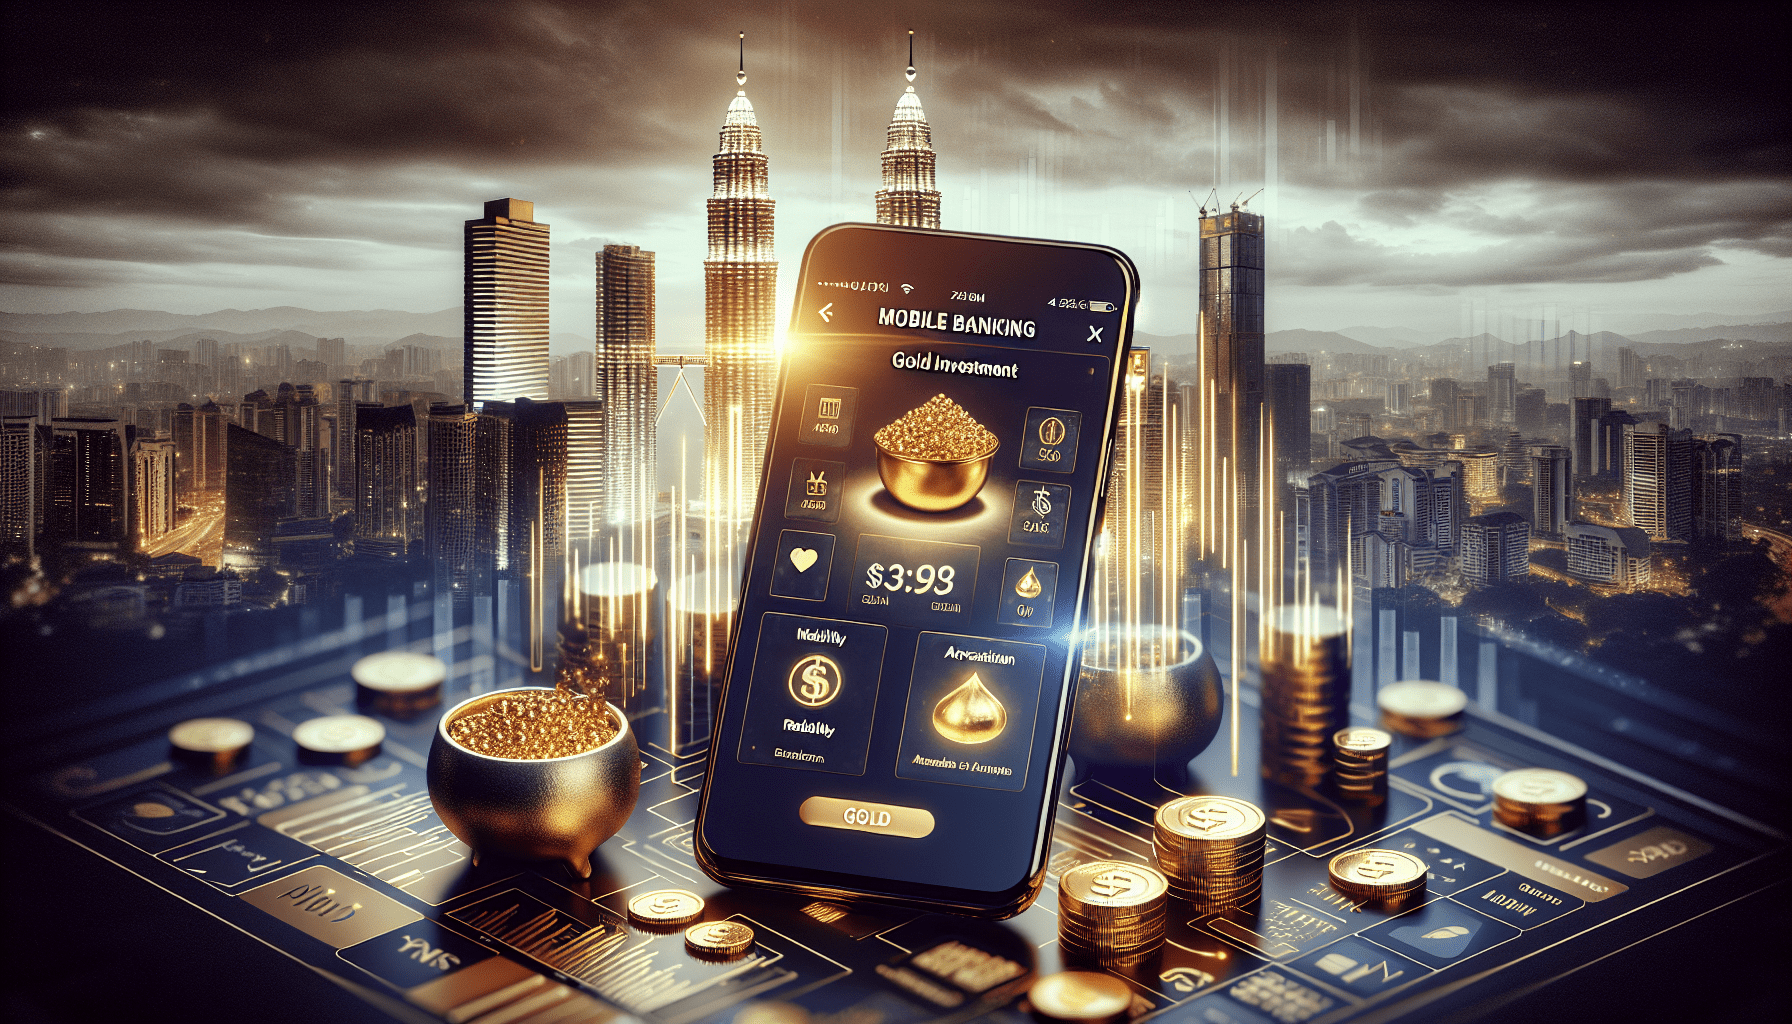 Can I Invest In Gold Through Mobile Banking With Malaysian Banks?